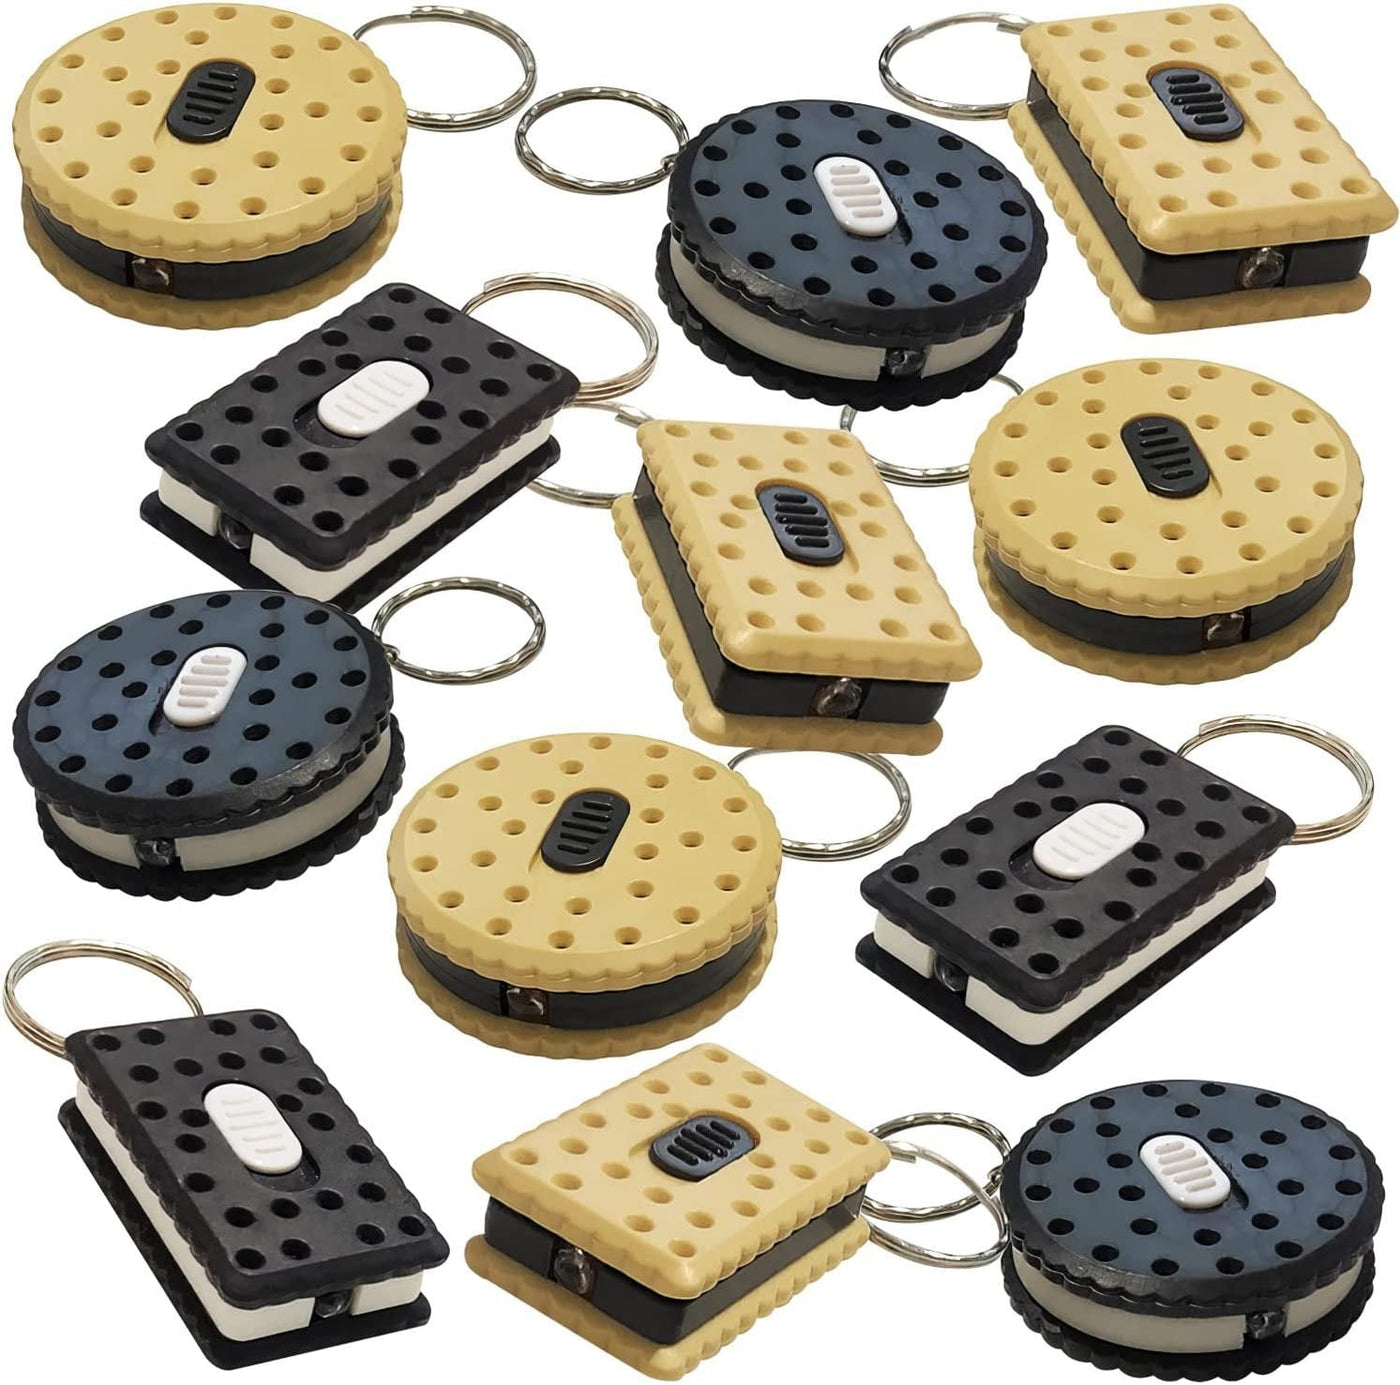 ArtCreativity Sandwich Cookie Flashlight Keychains, Pack of 24, LED Key Chains in Assorted Cookie Replicas, Durable Plastic Keyholders, Birthday Party Favors, Goodie Bag Fillers for Kids